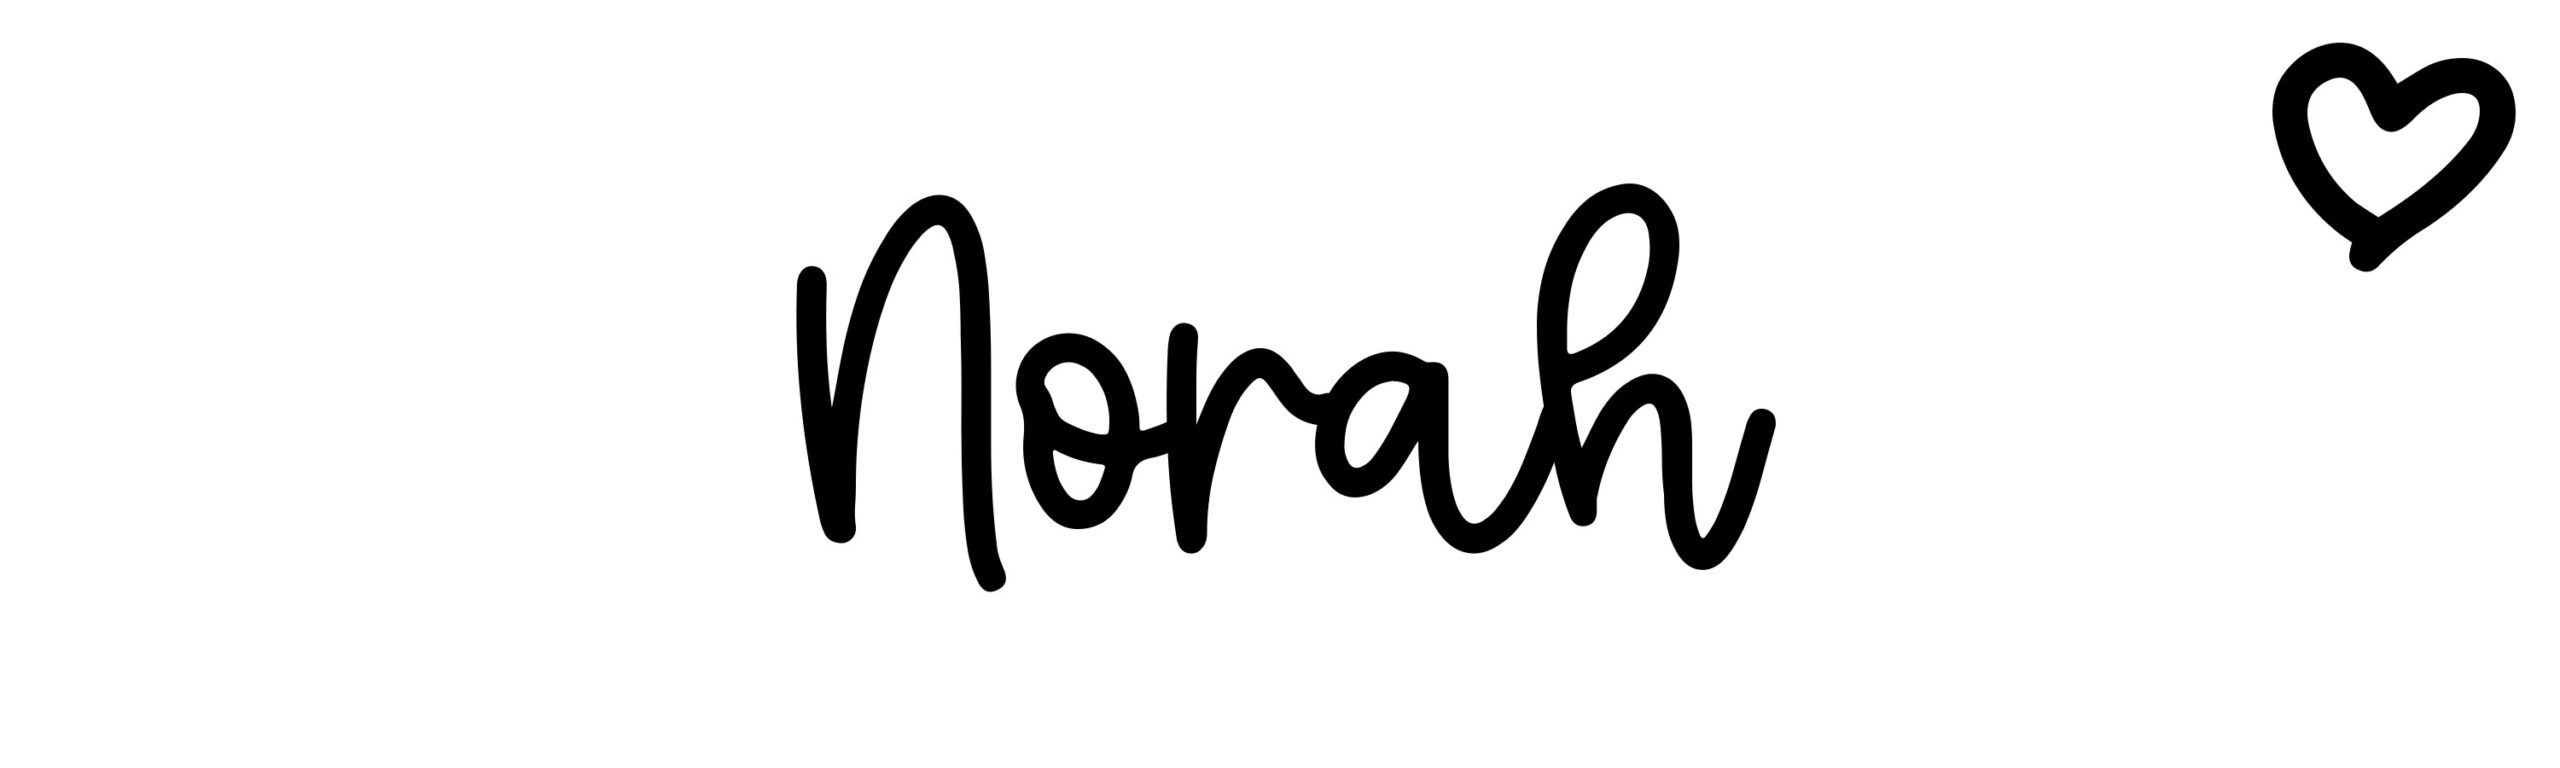 Norah - Name meaning, origin, variations and more